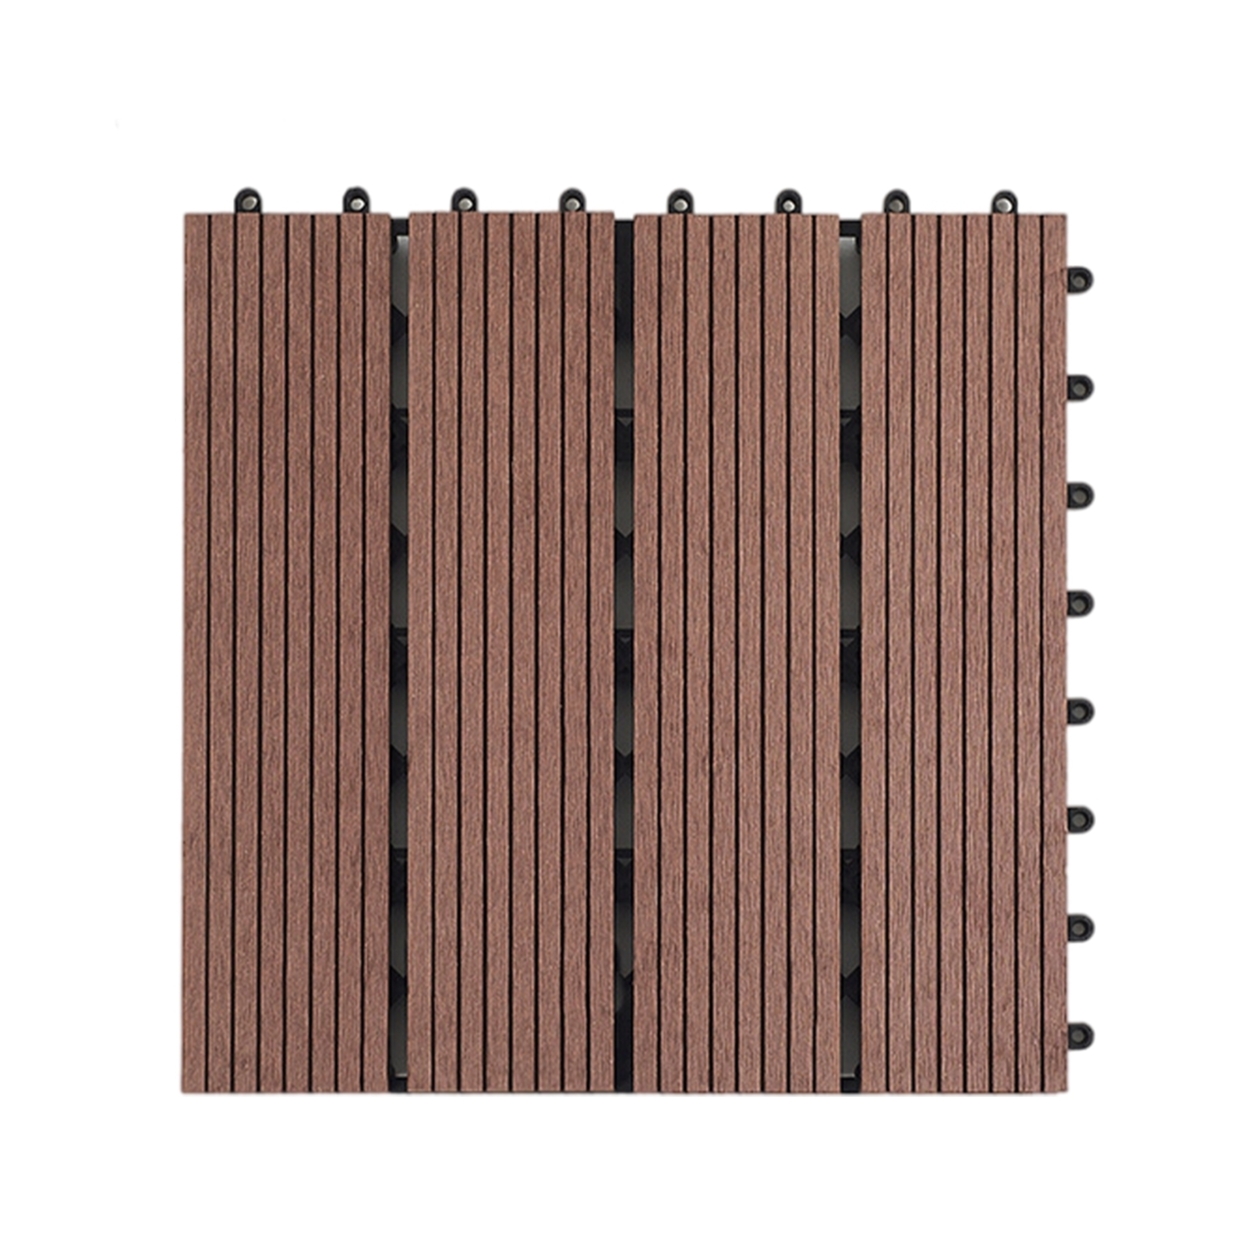 Wan 1Pc Convenient Floor Tile Flame Retardant Eco-friendly Waterproof Easy Installation Plastic Tile for Home - coffee